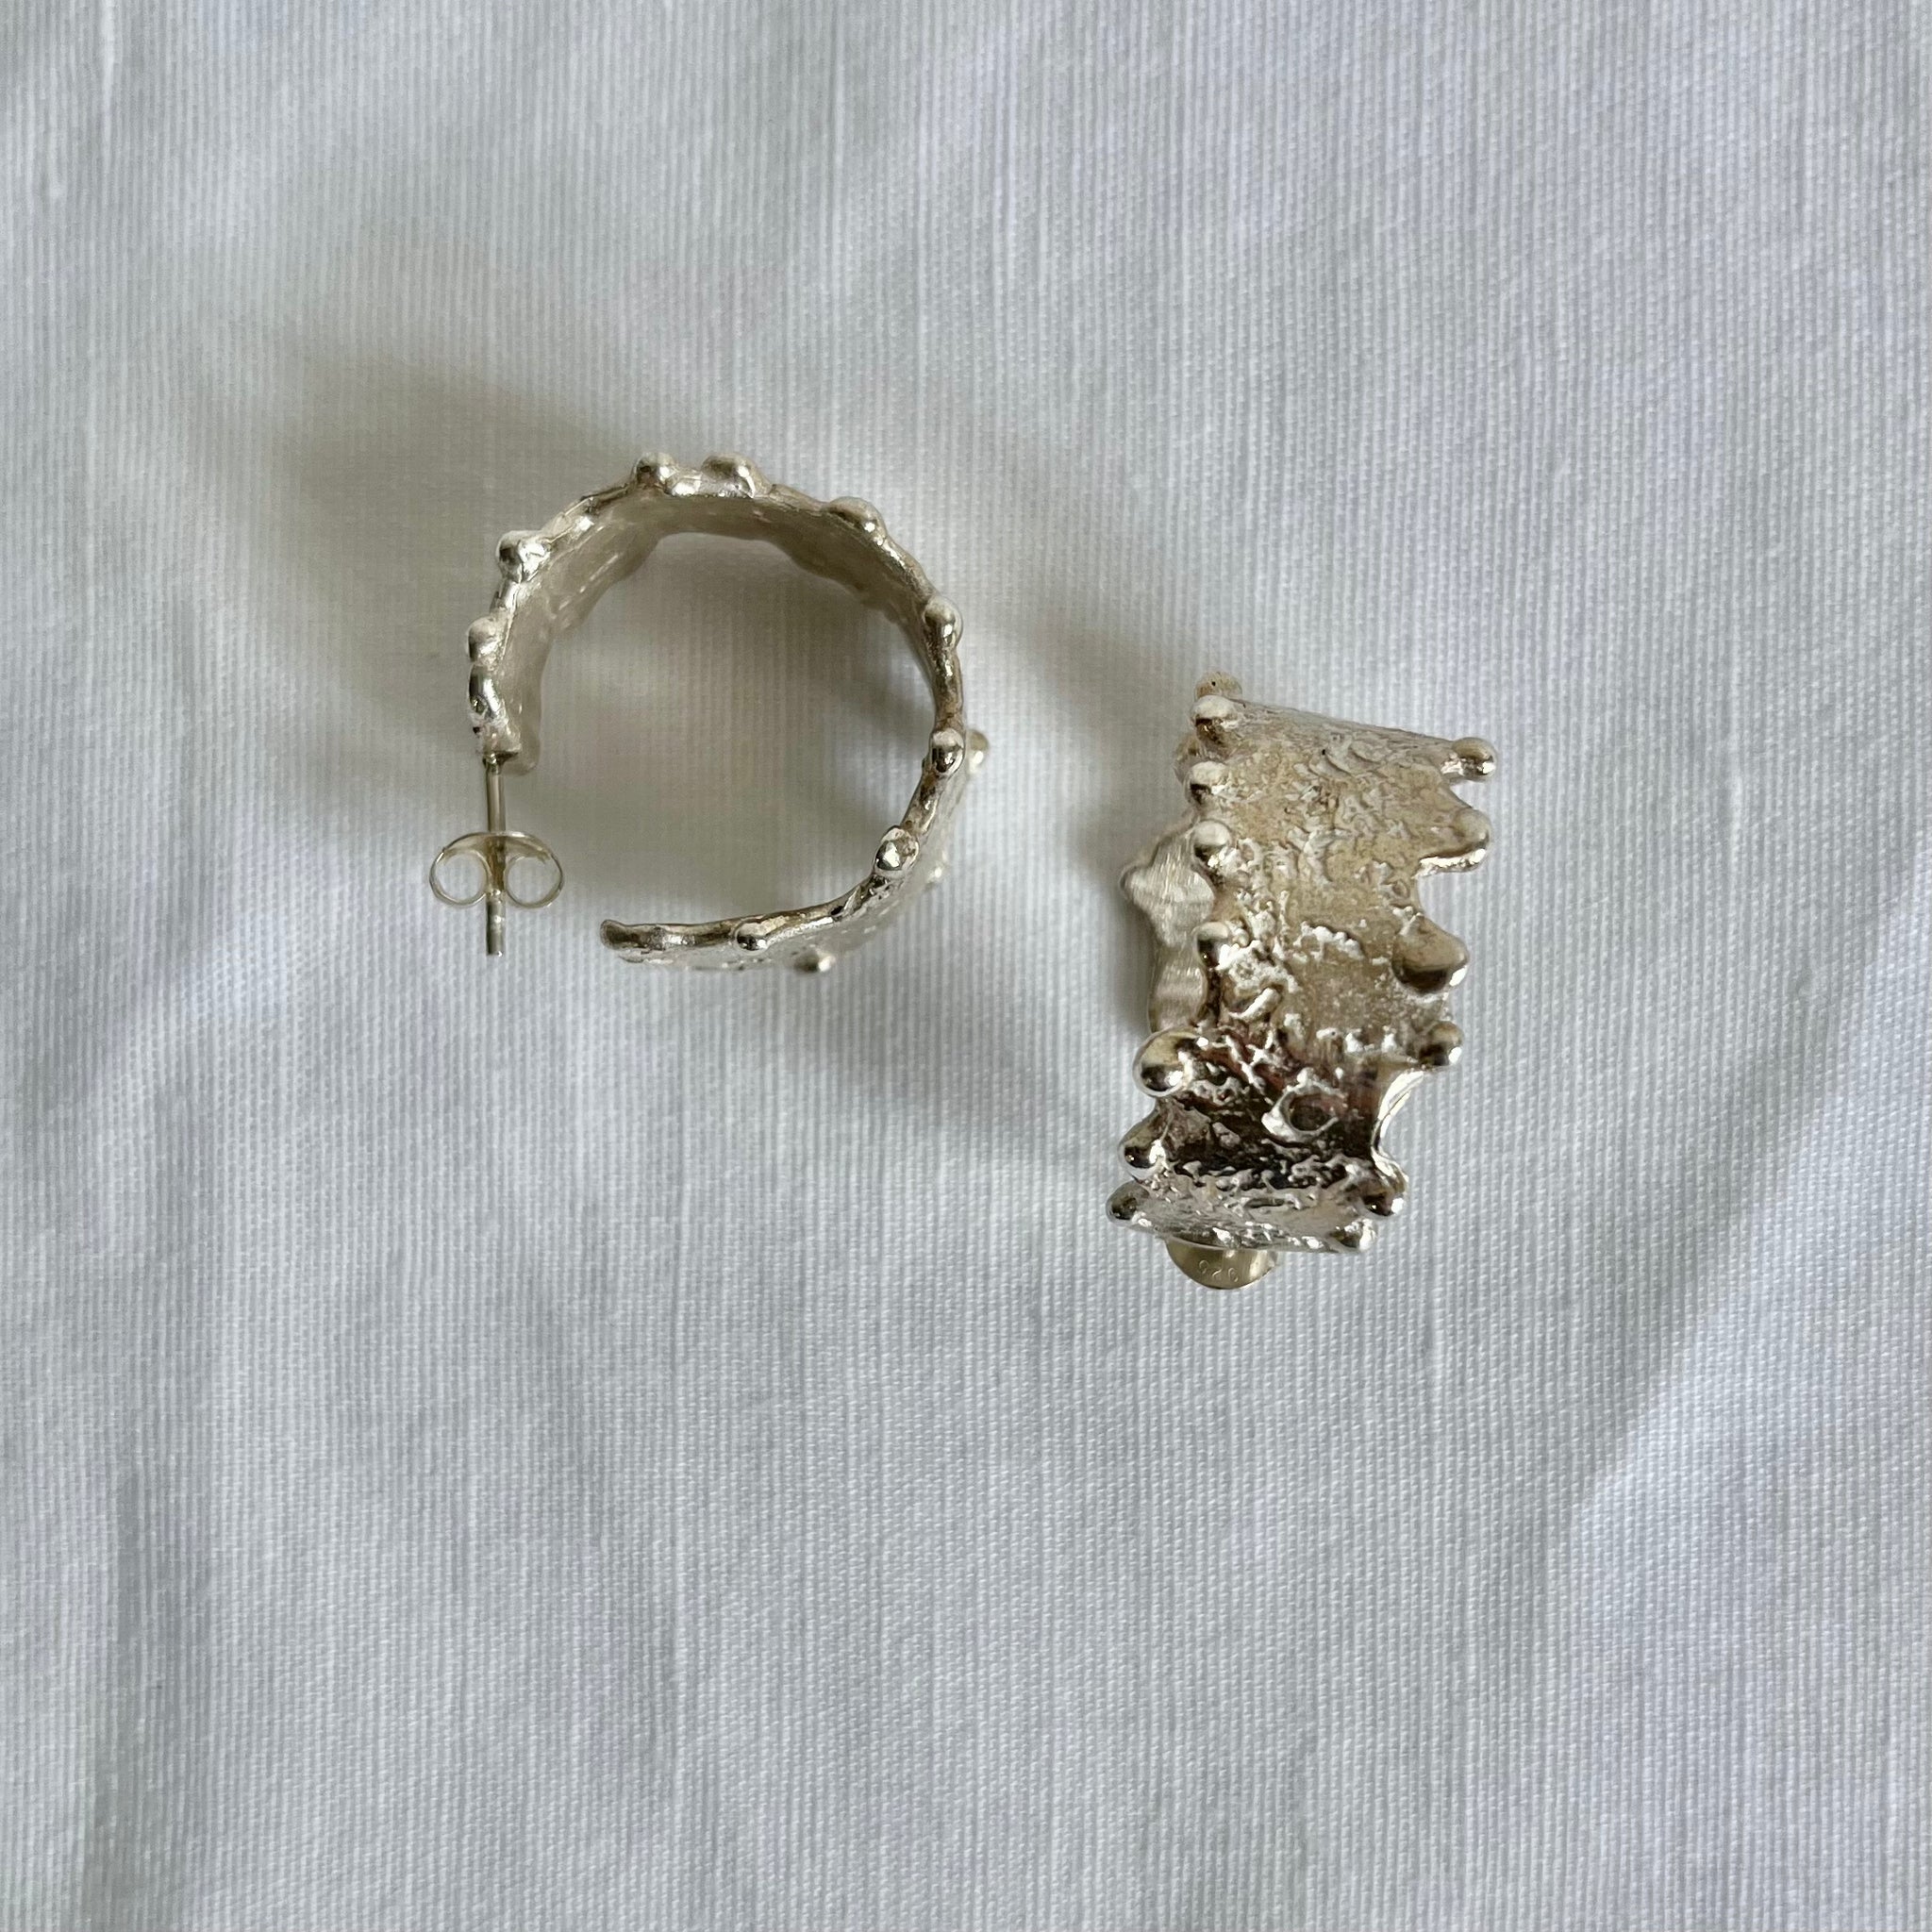 Sofia Novoa - Sterling Silver or Gold Plated 'Gaudi' Earrings (sno007)